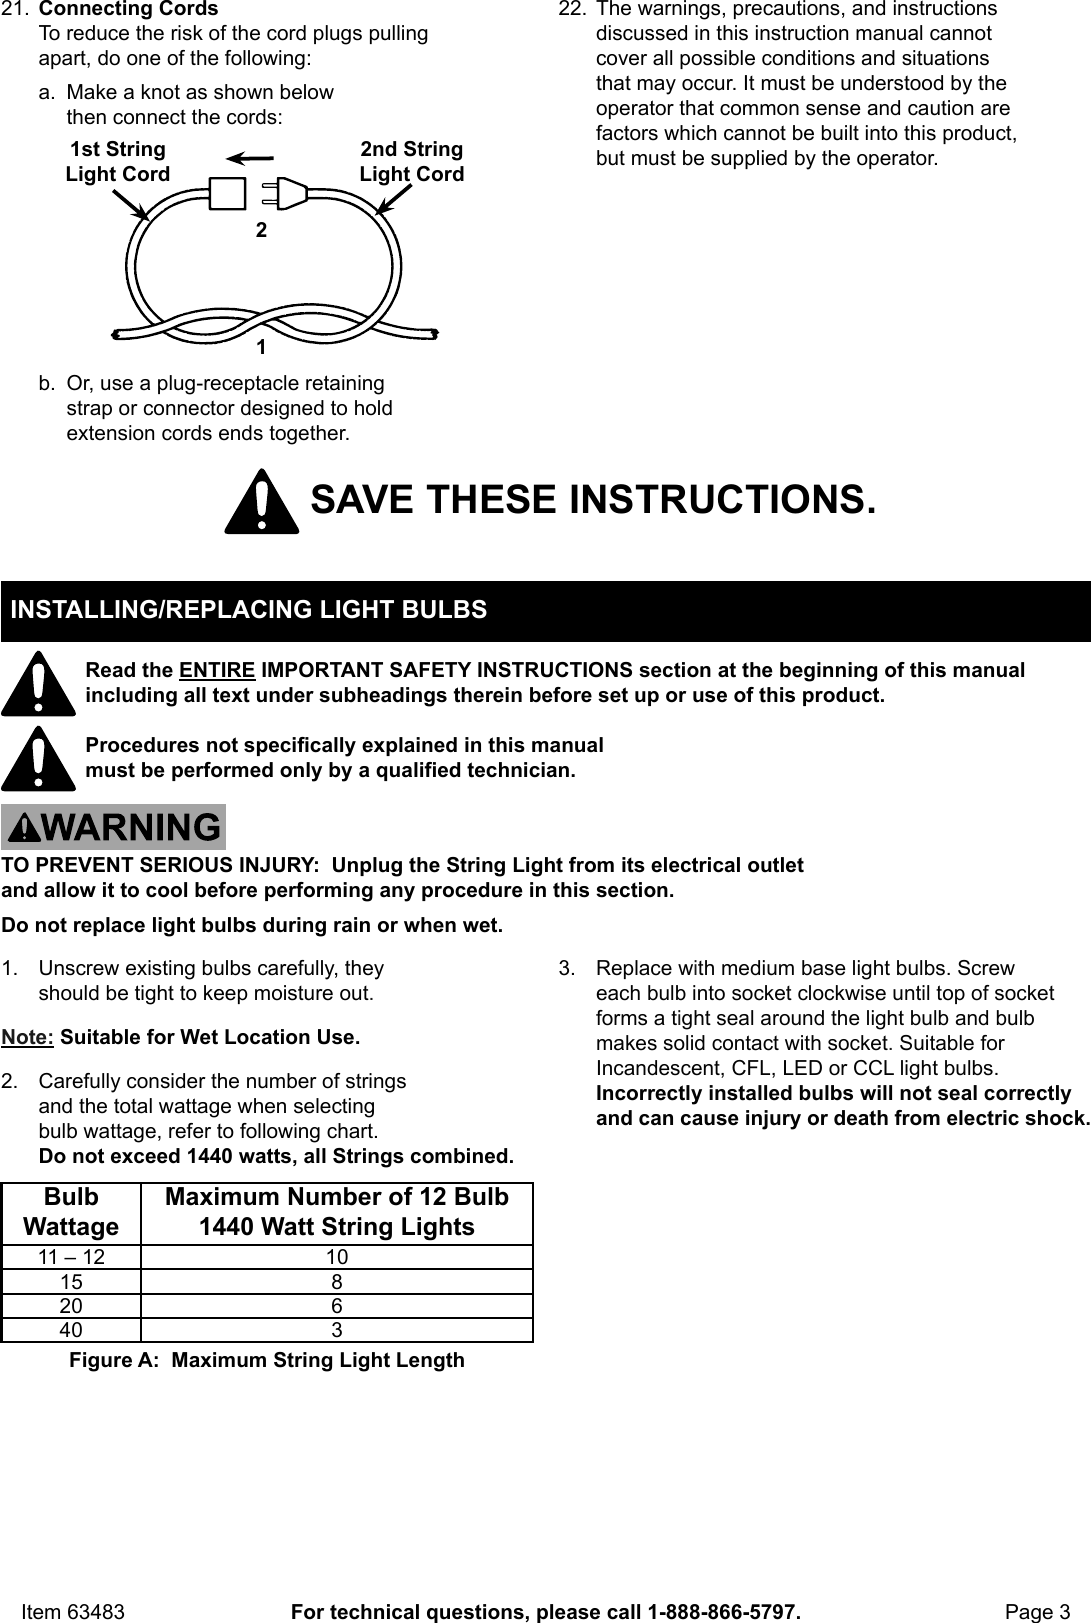 Page 3 of 4 - Manual For The 63483 24 Ft. 12 Bulb Outdoor String Lights